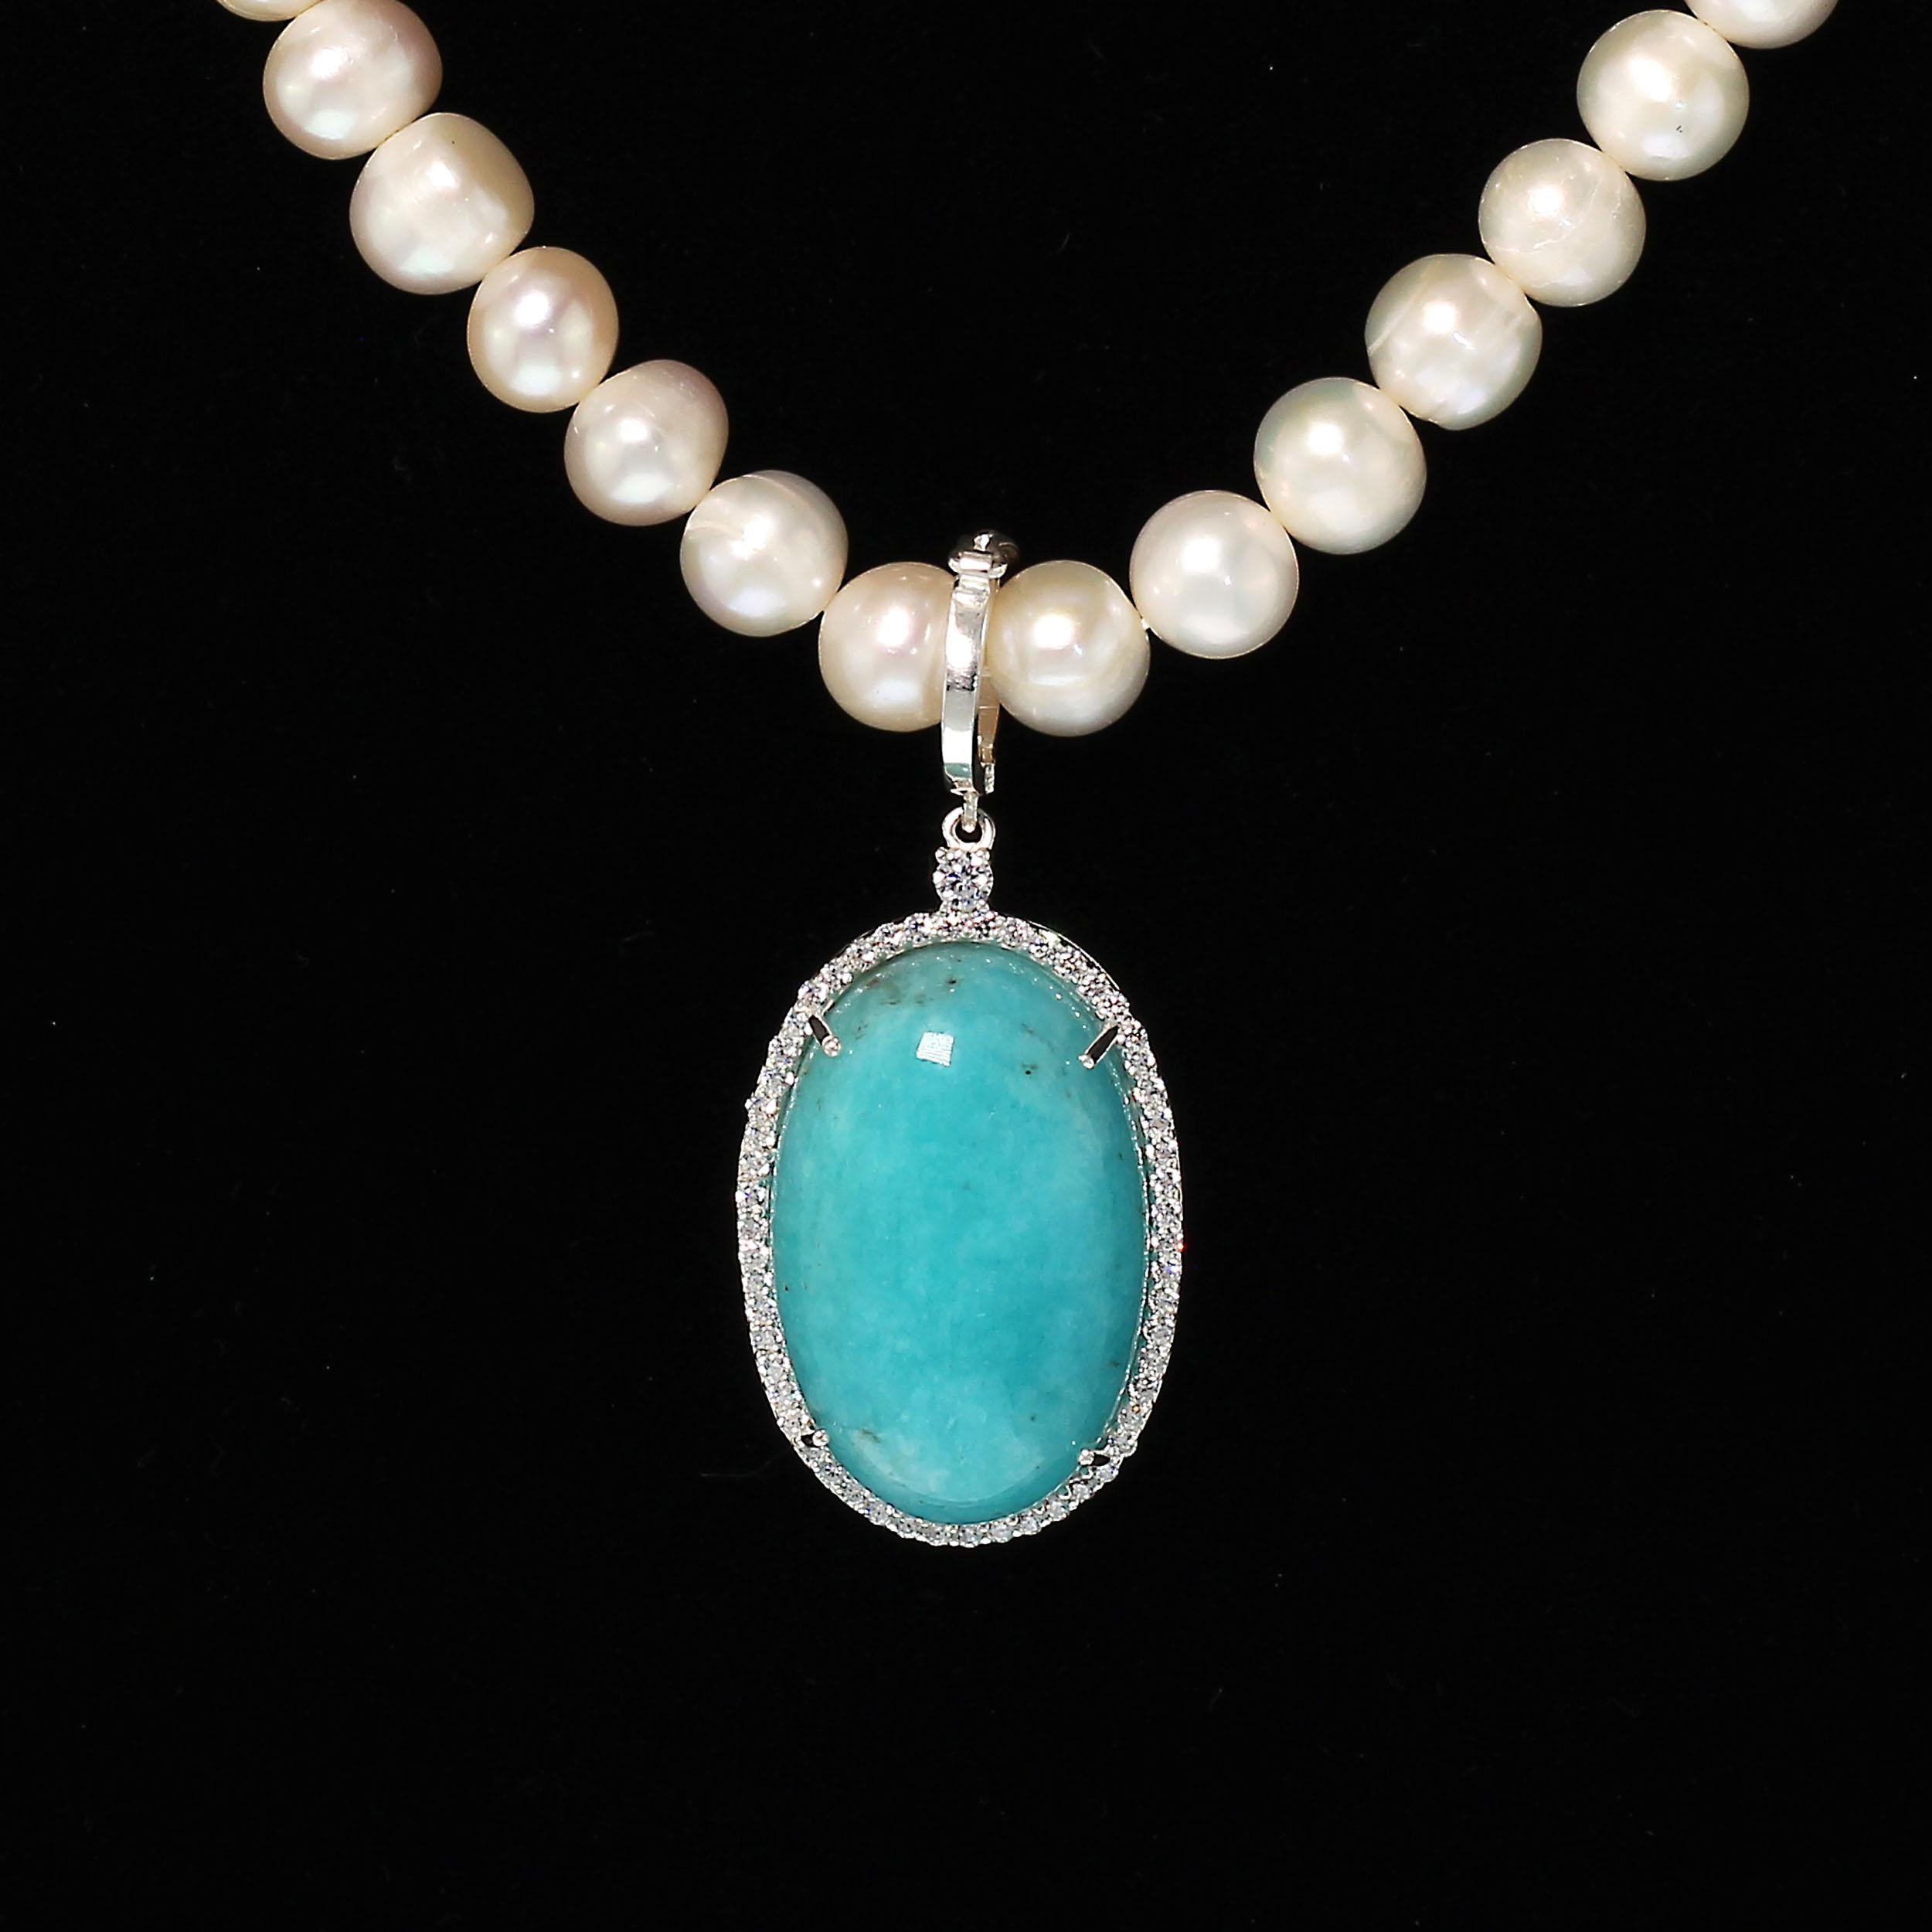 Elegant pendant featuring 33.40 carat highly polished Amazonite cabochon surrounded with sparkling Cambodian Zircons. This pendant is stunning. It is 1 7/8 inches in length with a hinged bail to easily fit on your favorite pearl necklace, chain, or